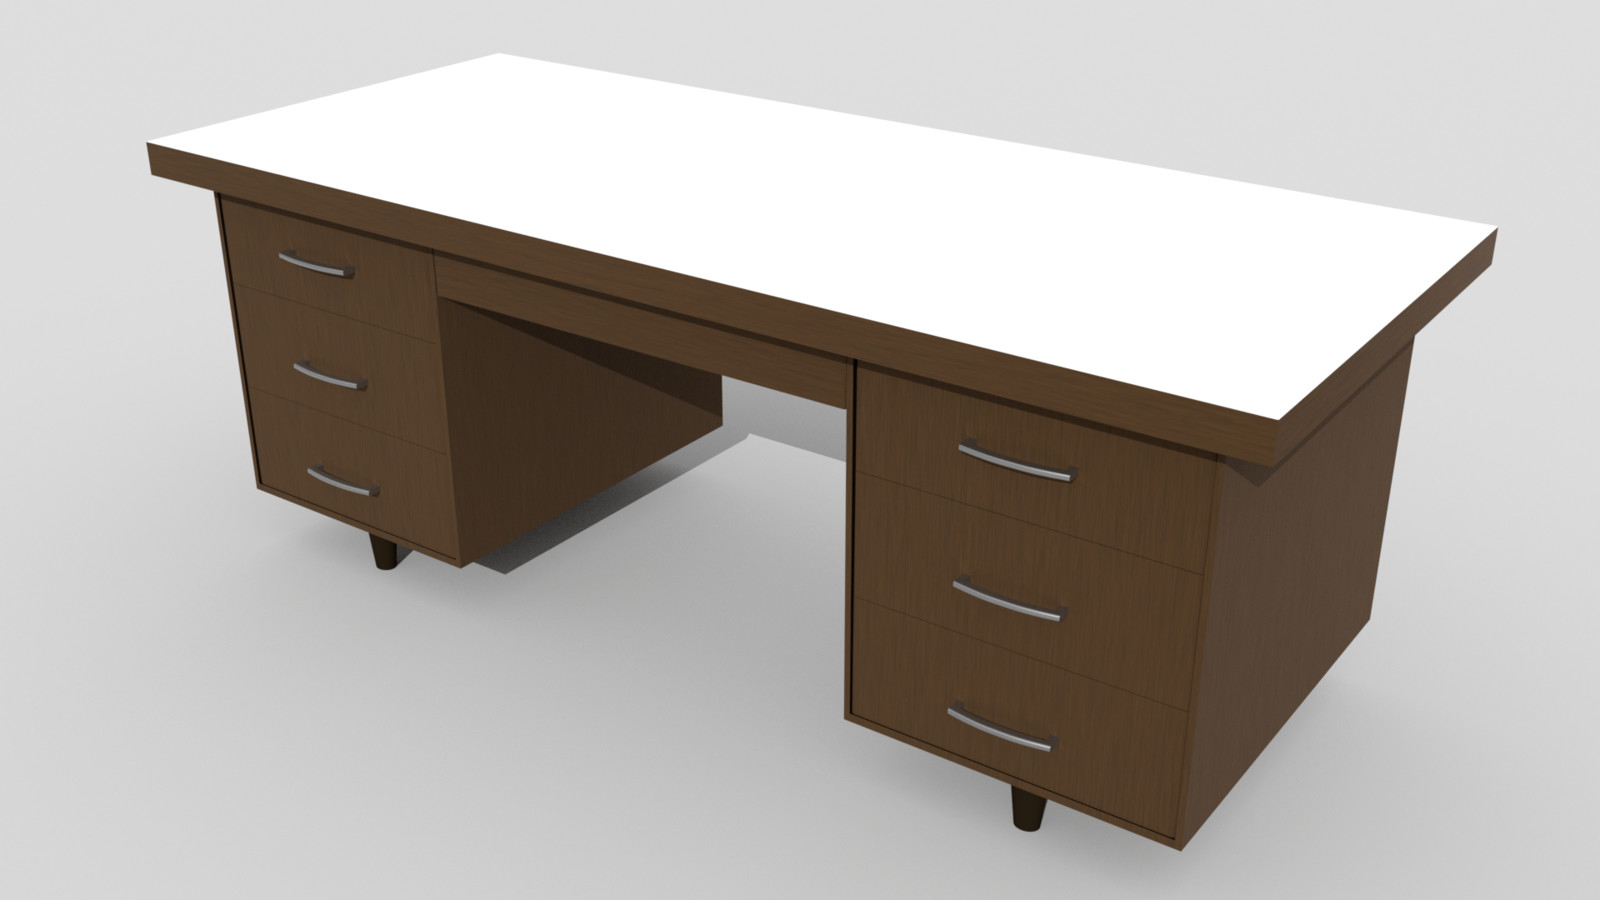 Overall view of the desk.